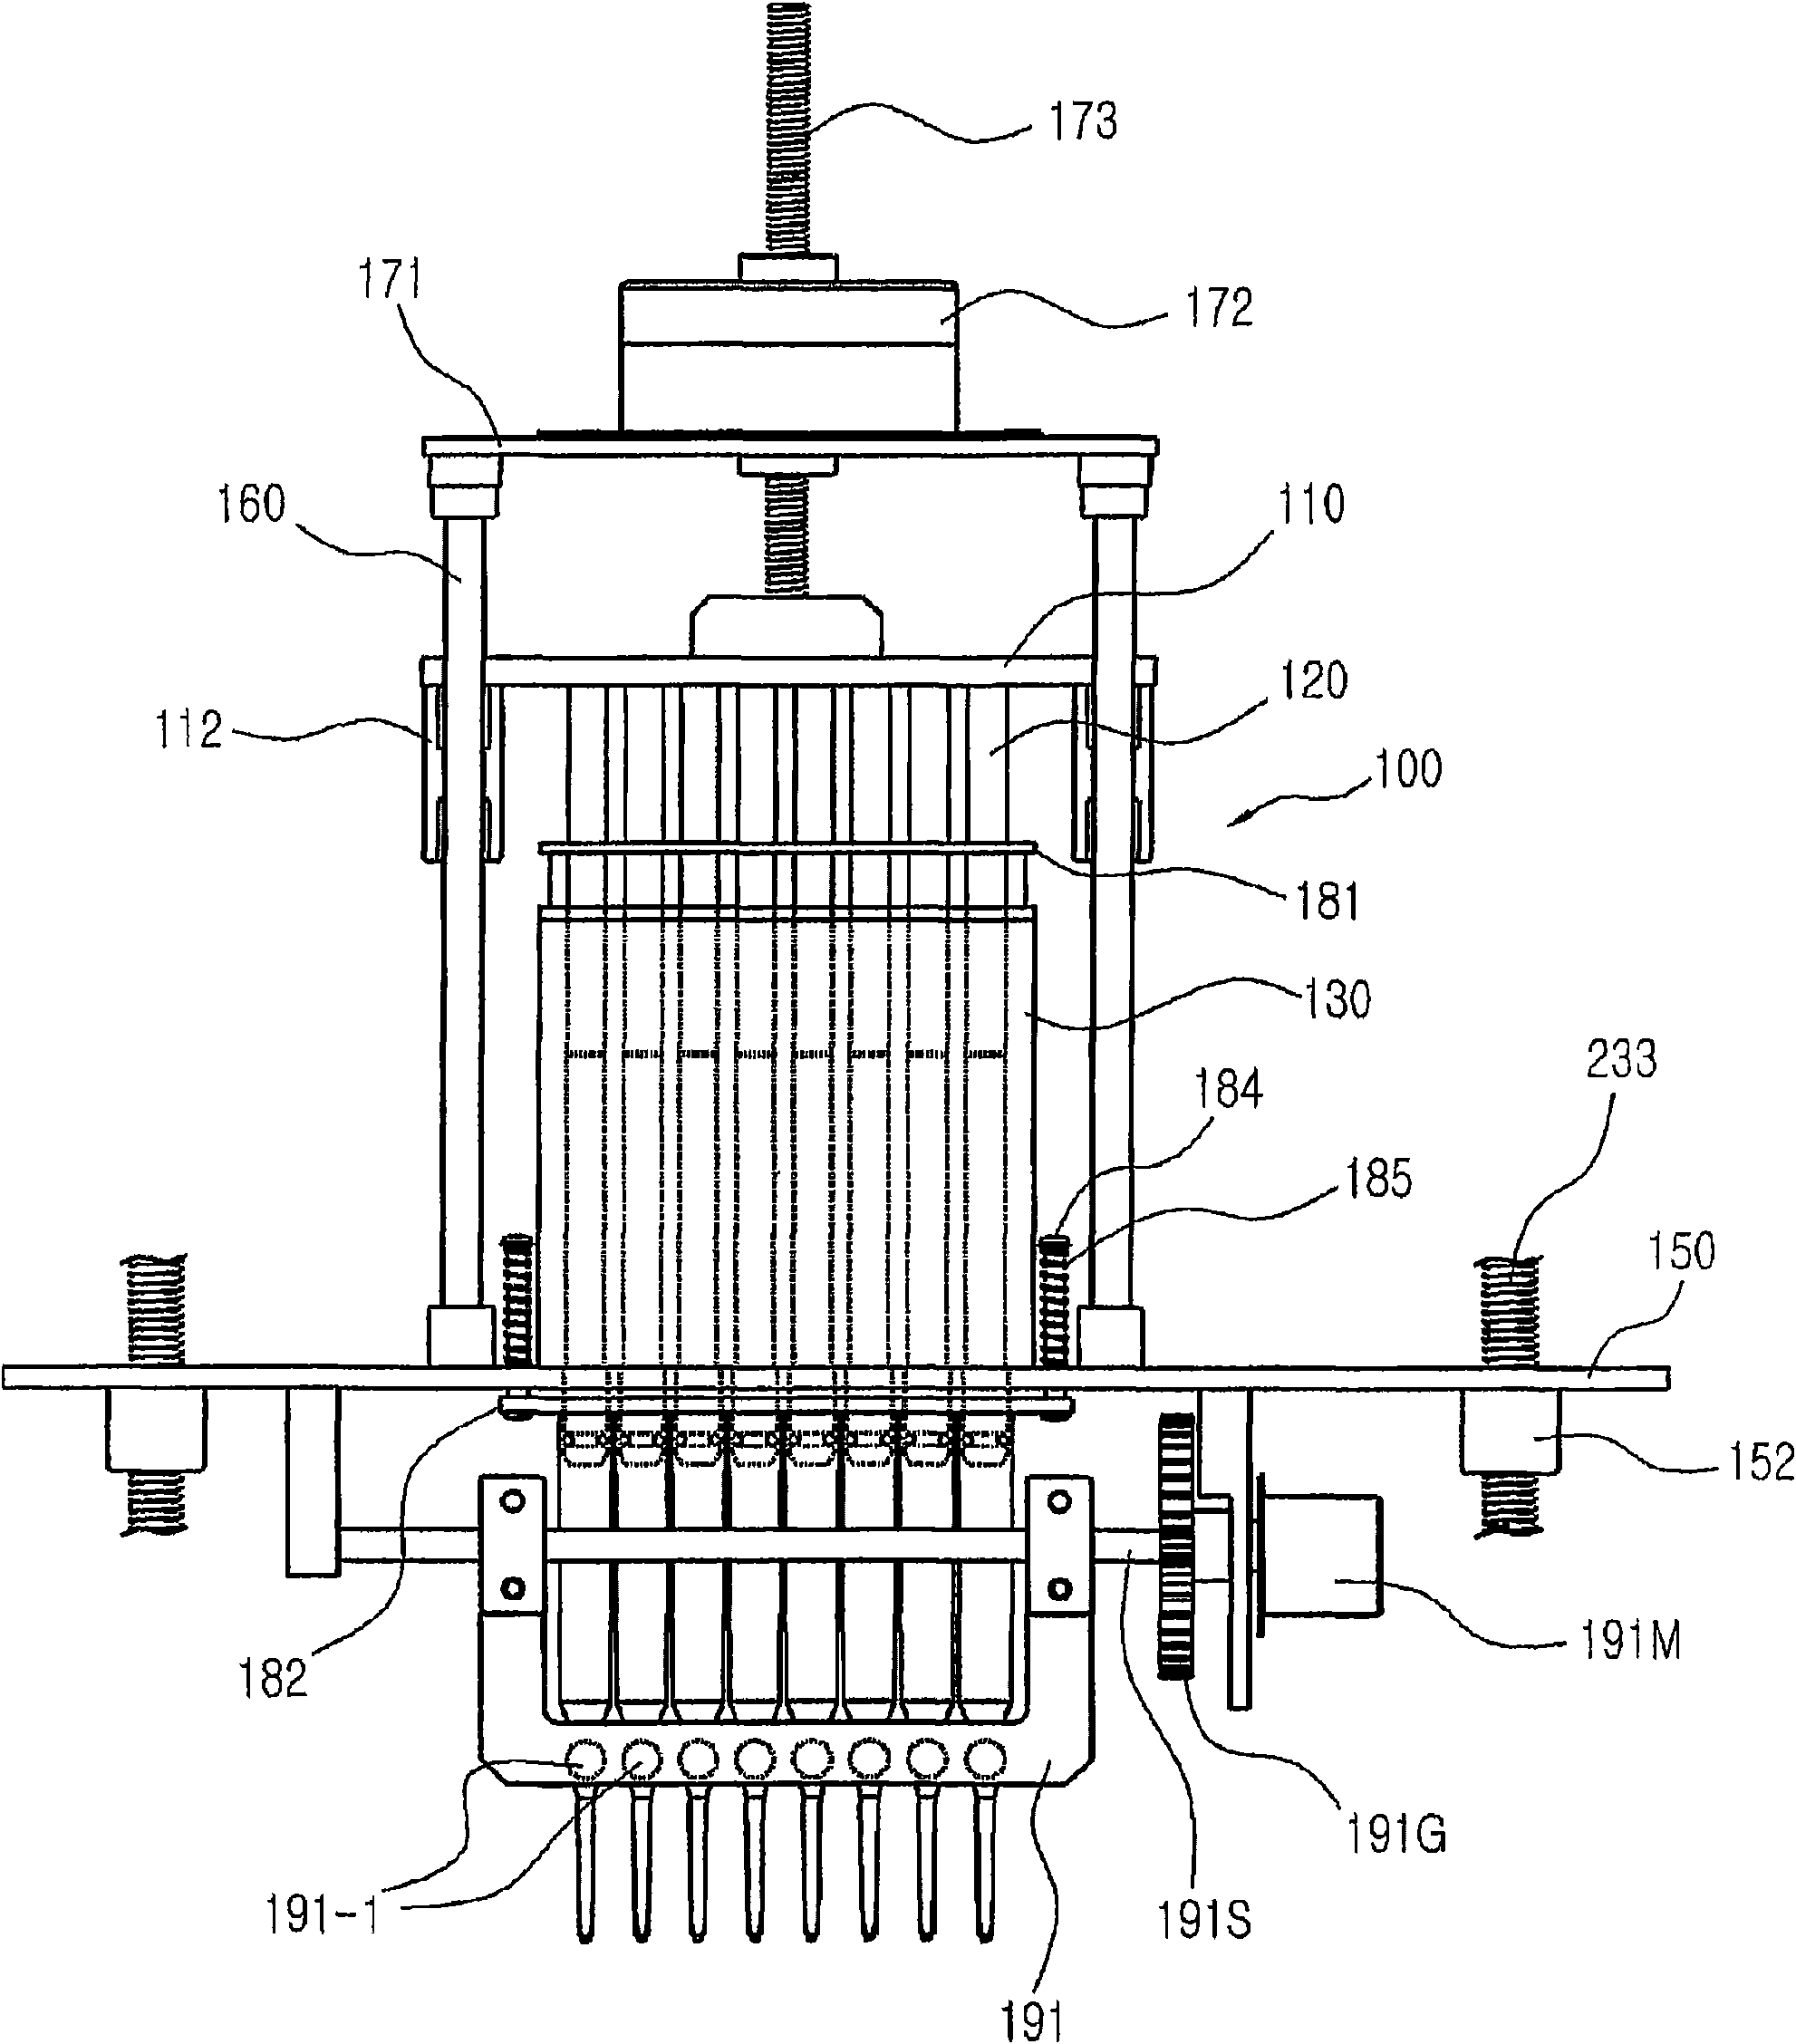 Automatic refining apparatus, multi-well plate kit and method for extracting hexane from biological samples